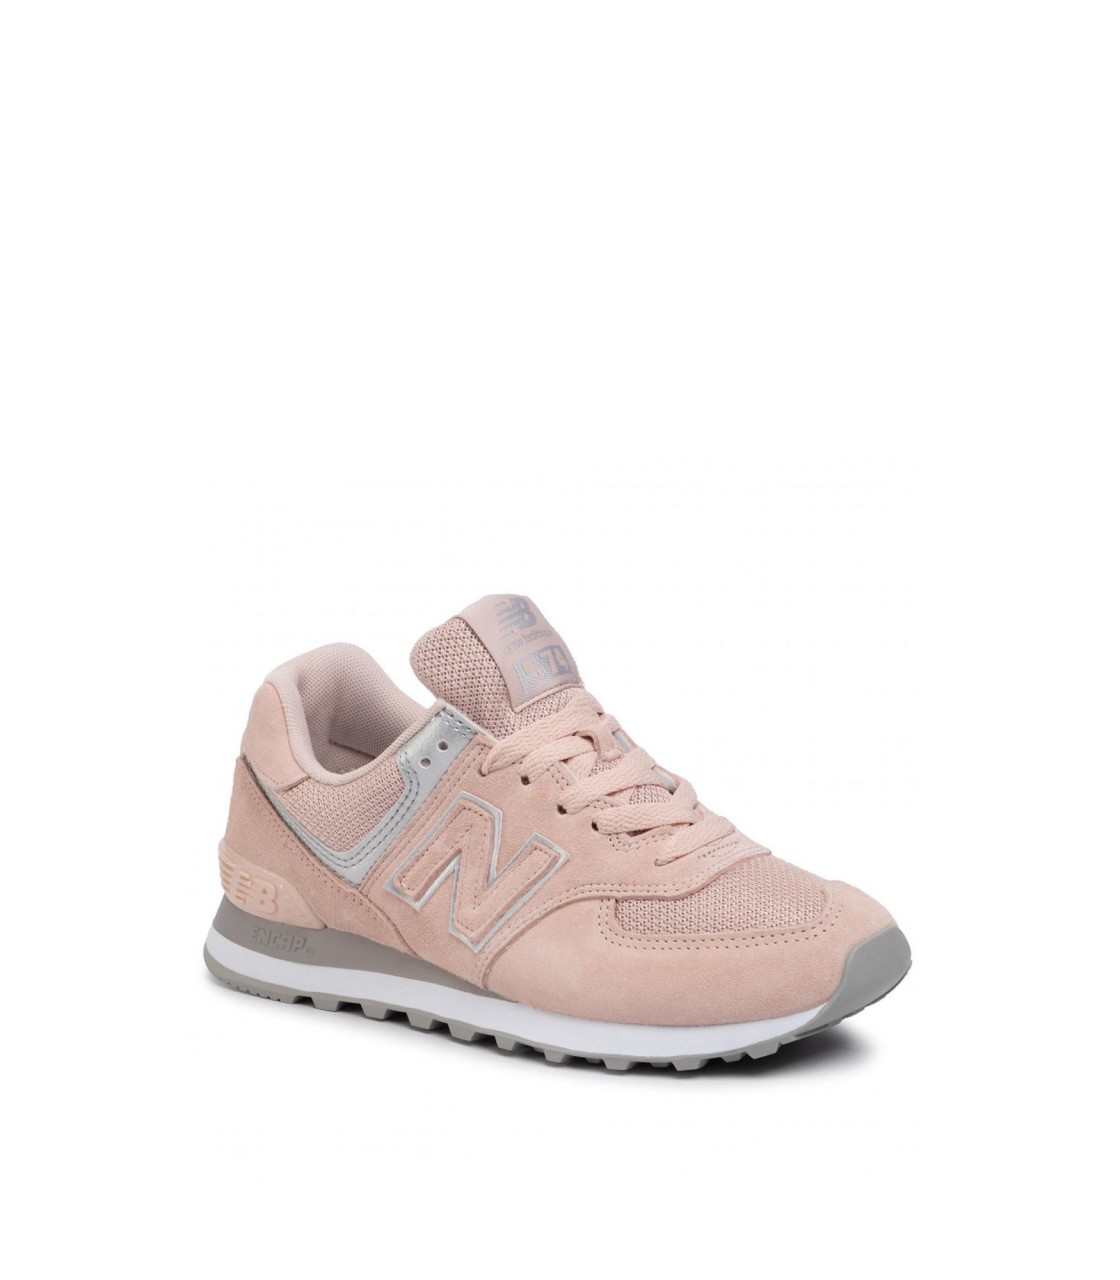 new balance saldi - 54% OFF - Free delivery - retail-front ...